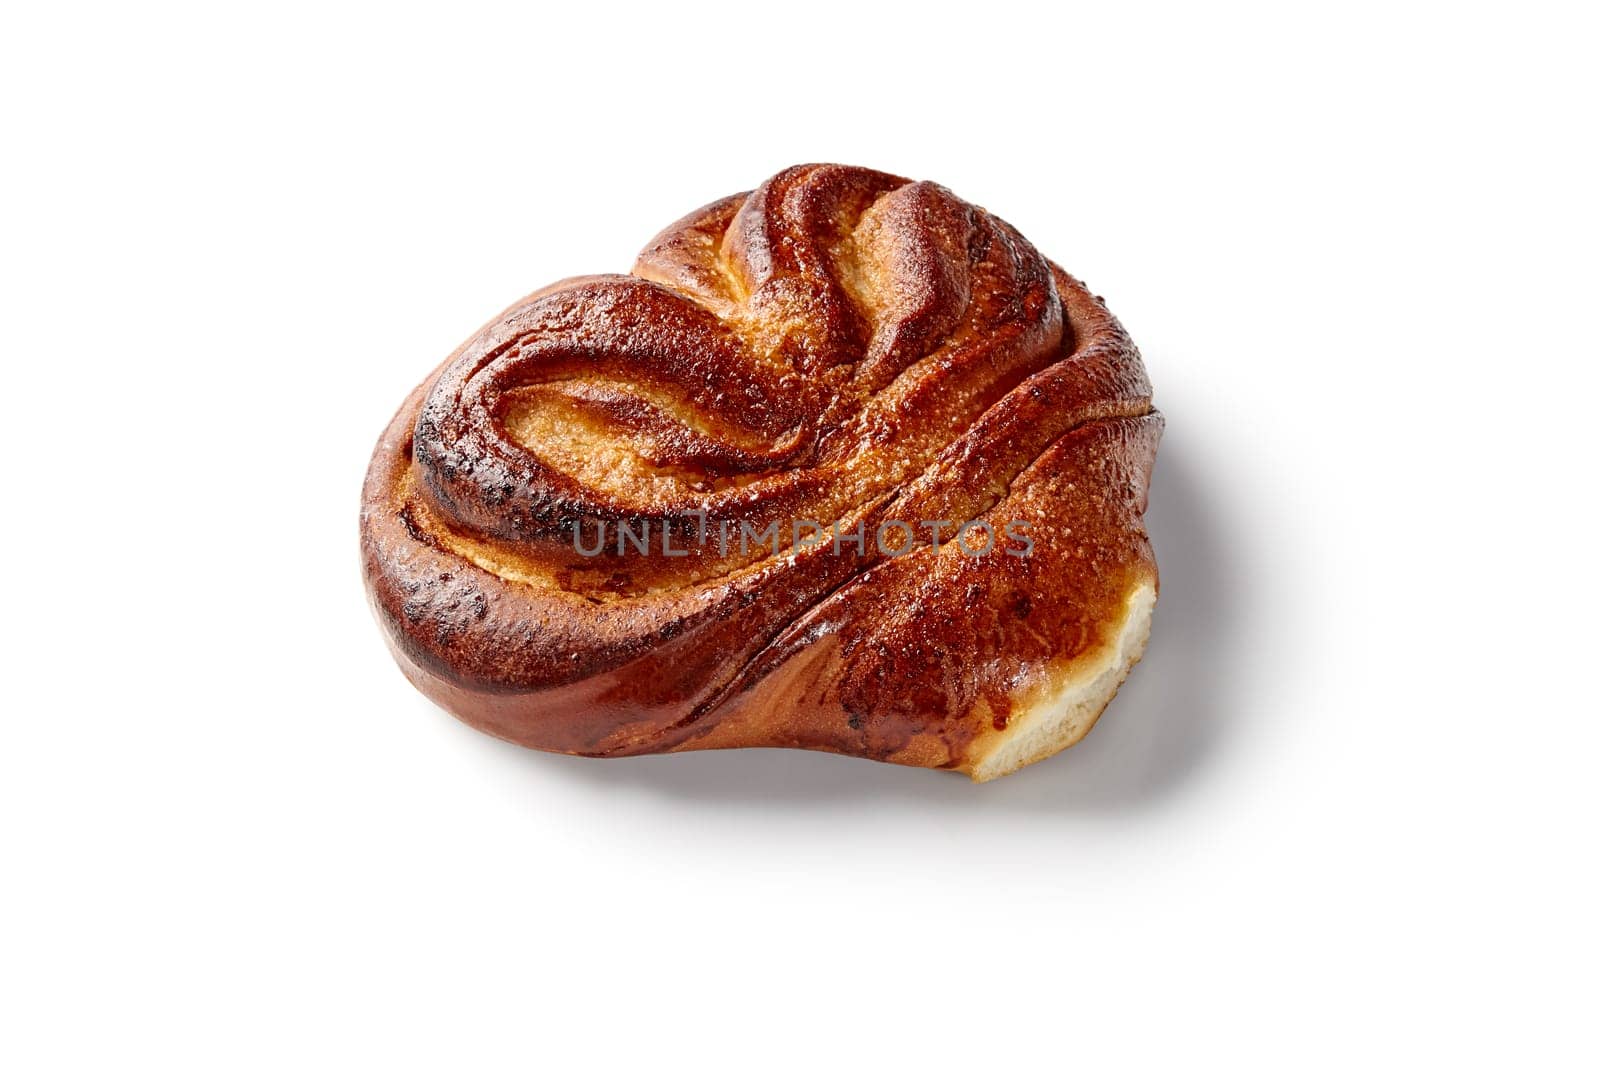 Fluffy browned sugar-dusted sweet bun, traditional Eastern European pastry, presented on white background